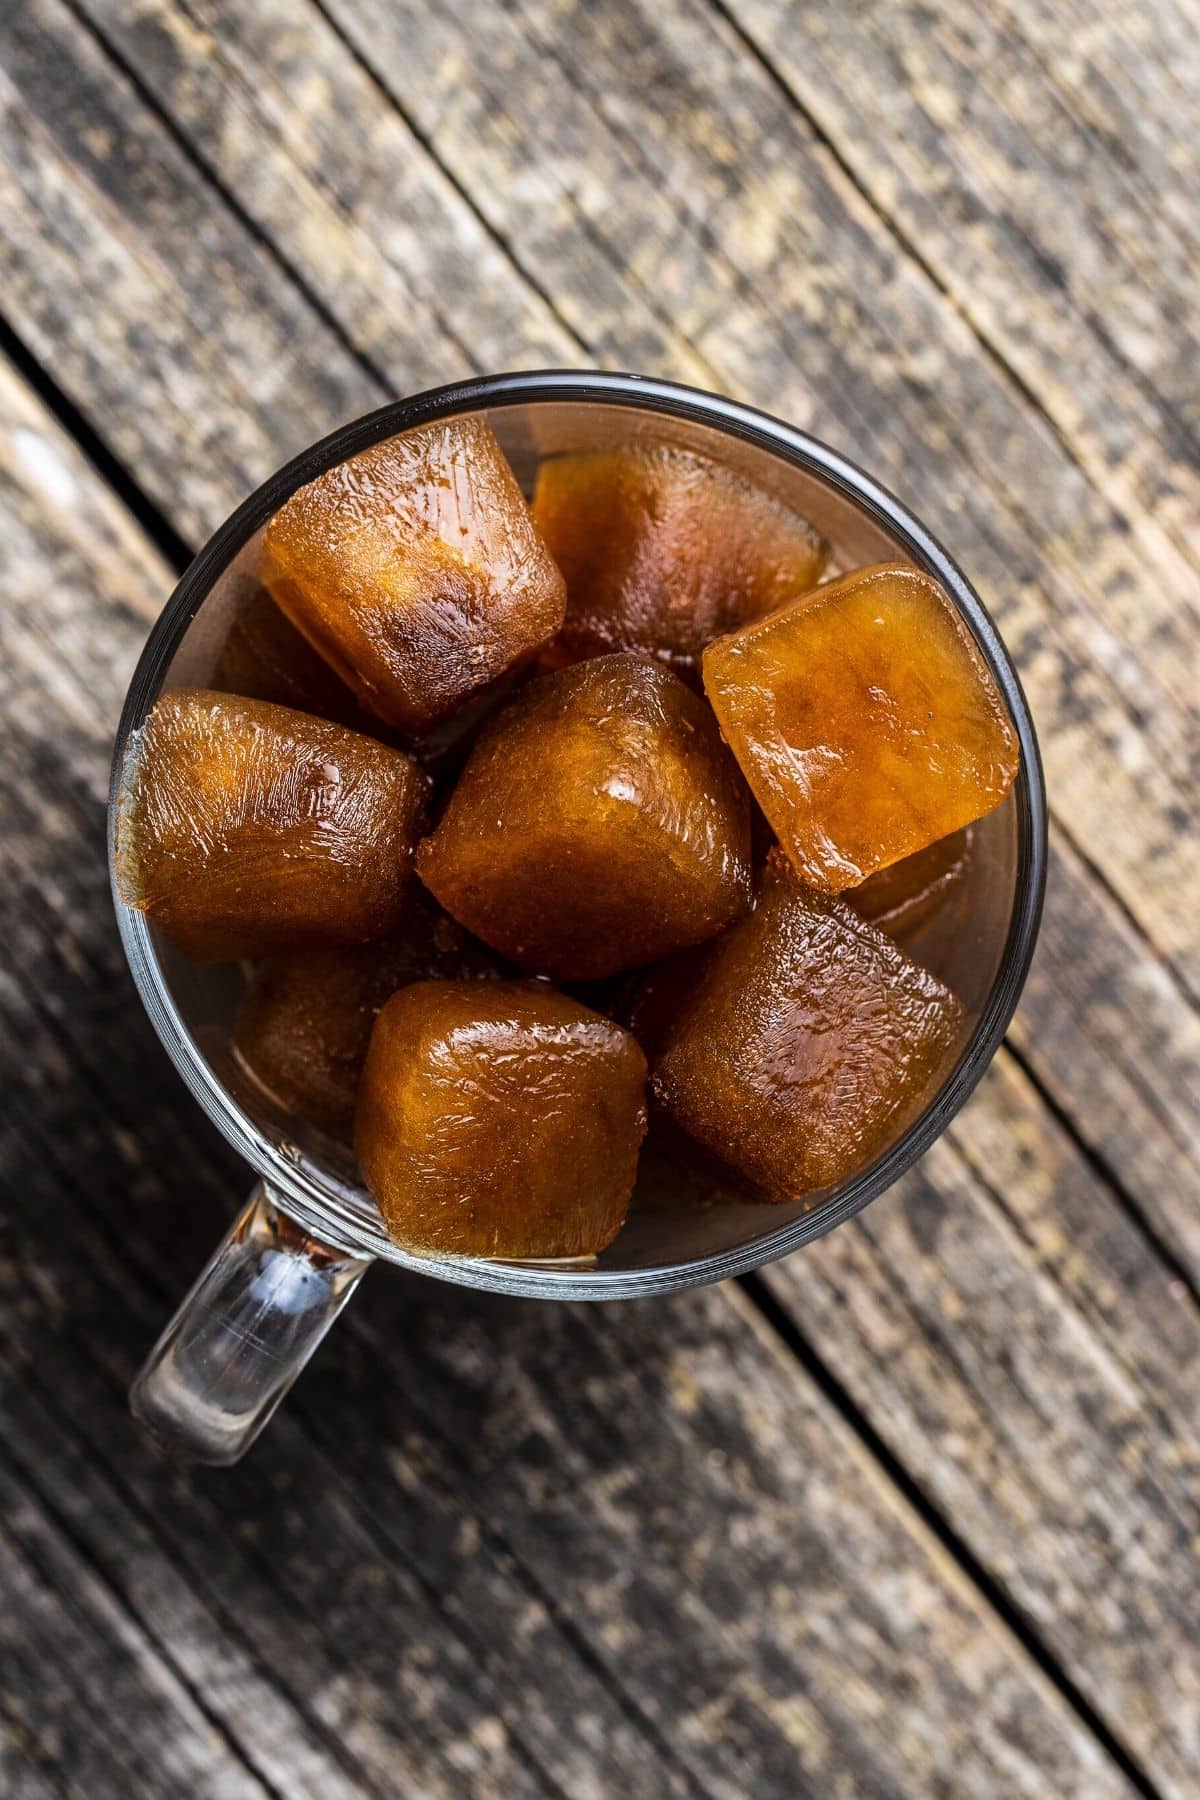 https://www.cleaneatingkitchen.com/wp-content/uploads/2022/05/dish-of-coffee-ice-cubes.jpg